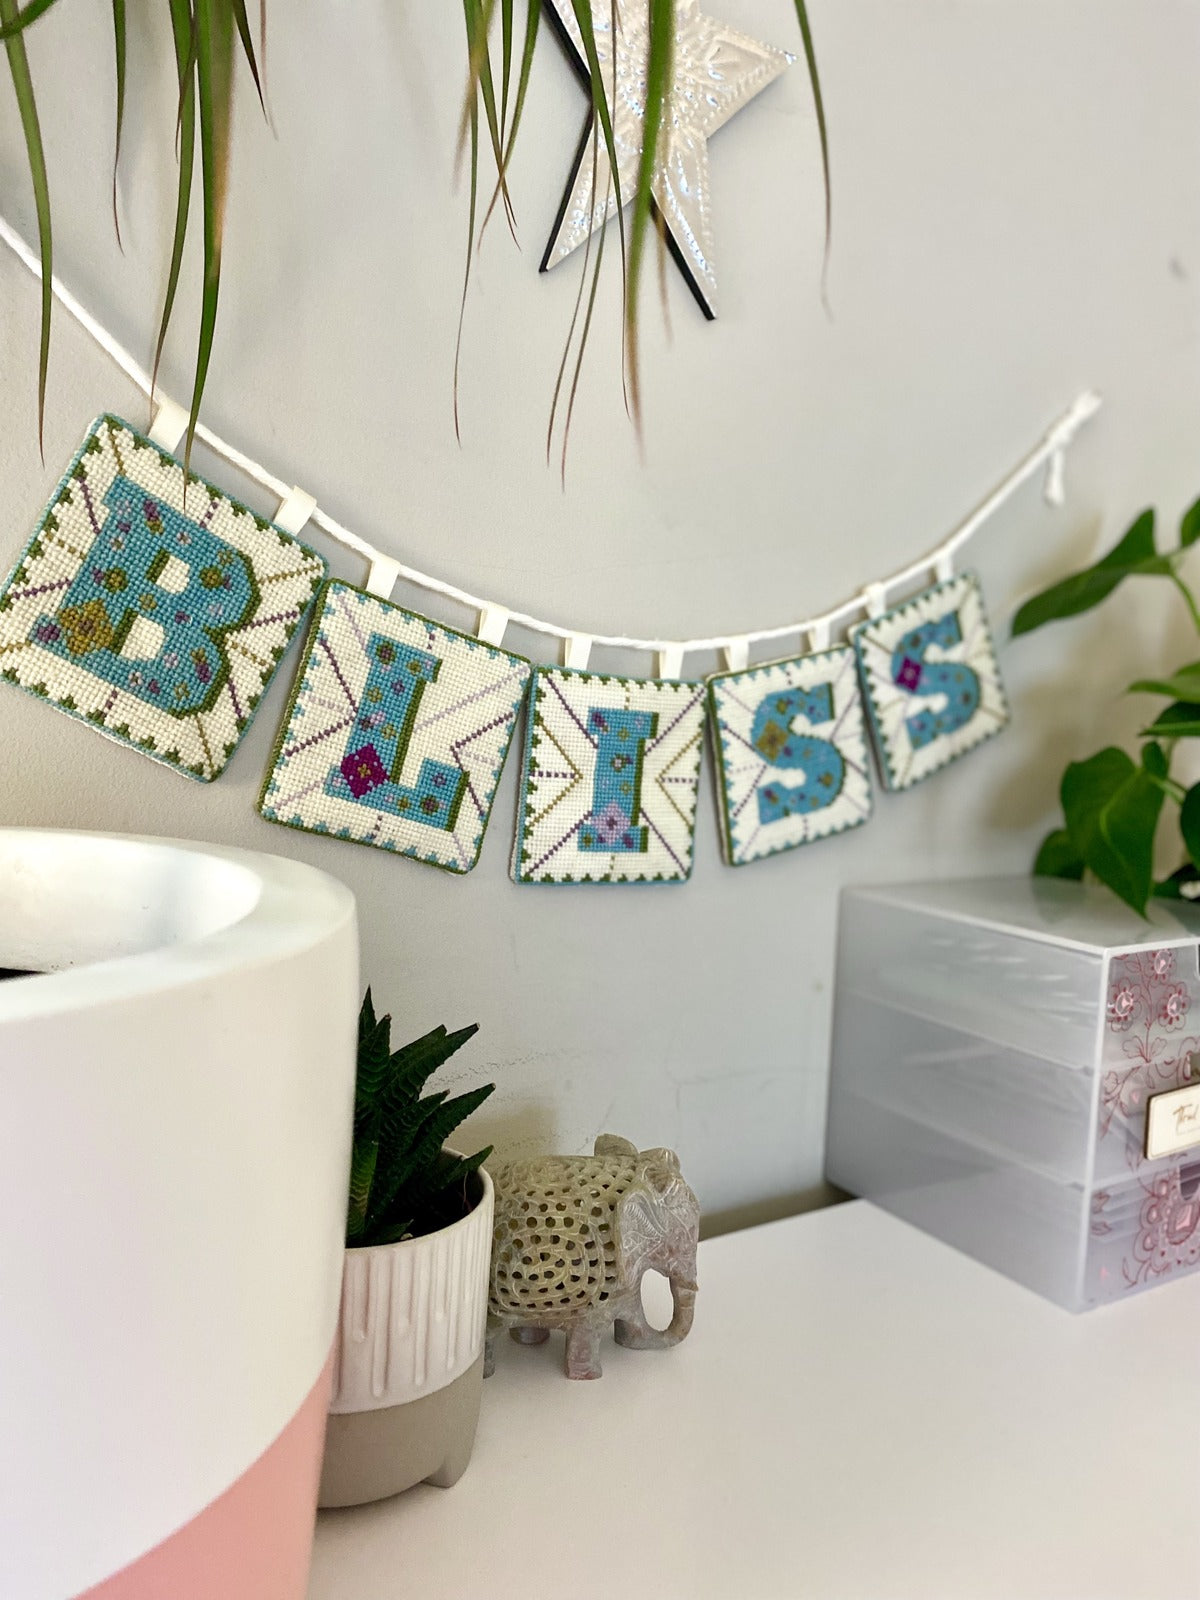 Finished tapestry letters made into a delightful bunting decoration spelling the word "Bliss".